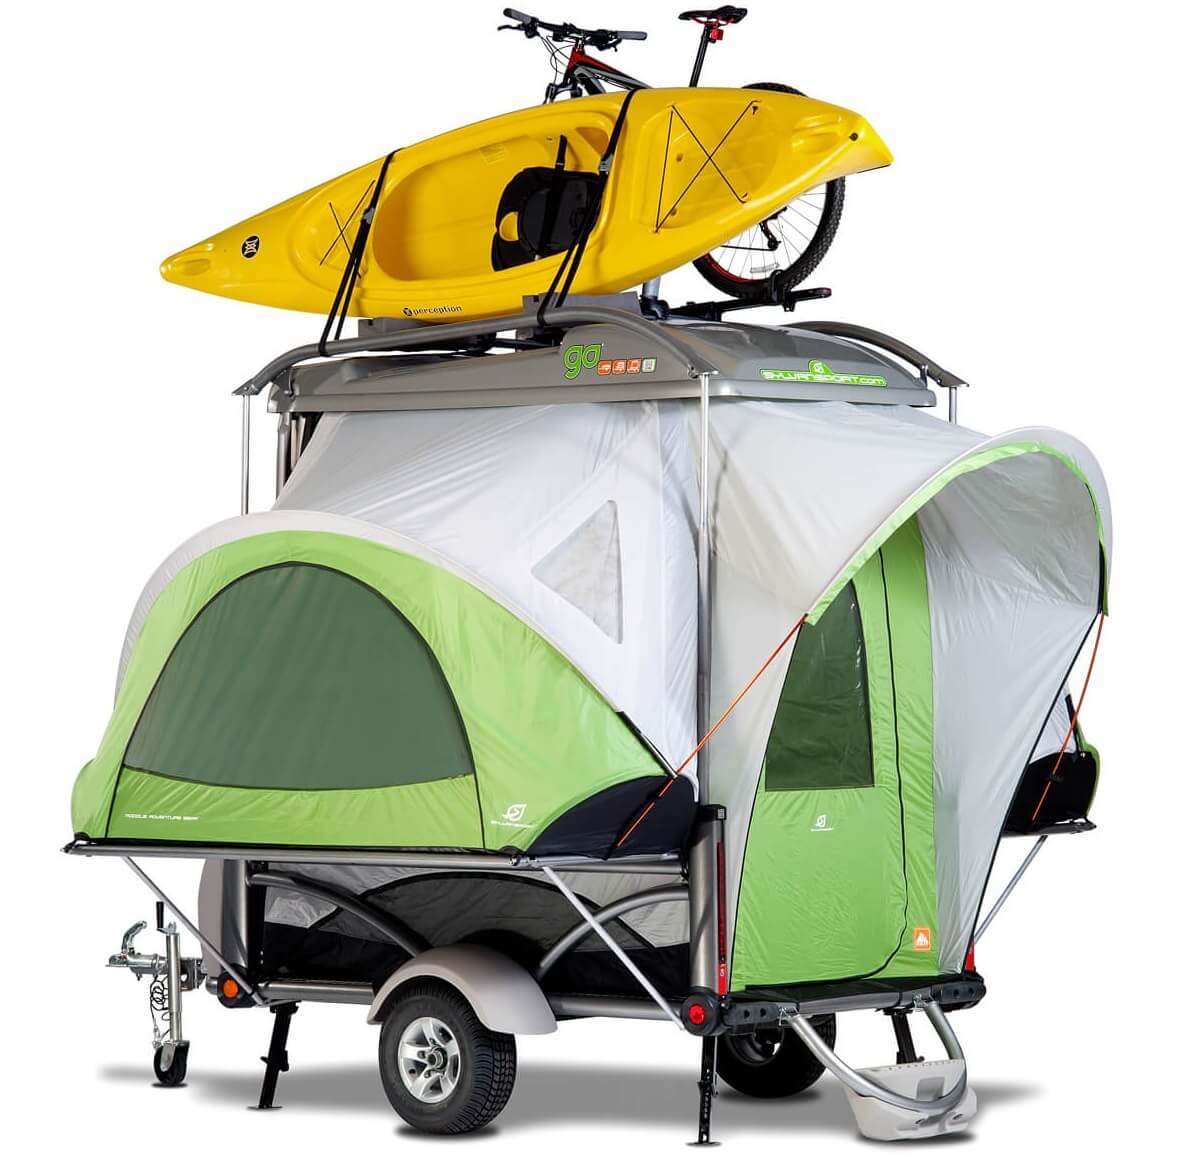 Sleep on the Water with this Fishing Boat and Tent Combo